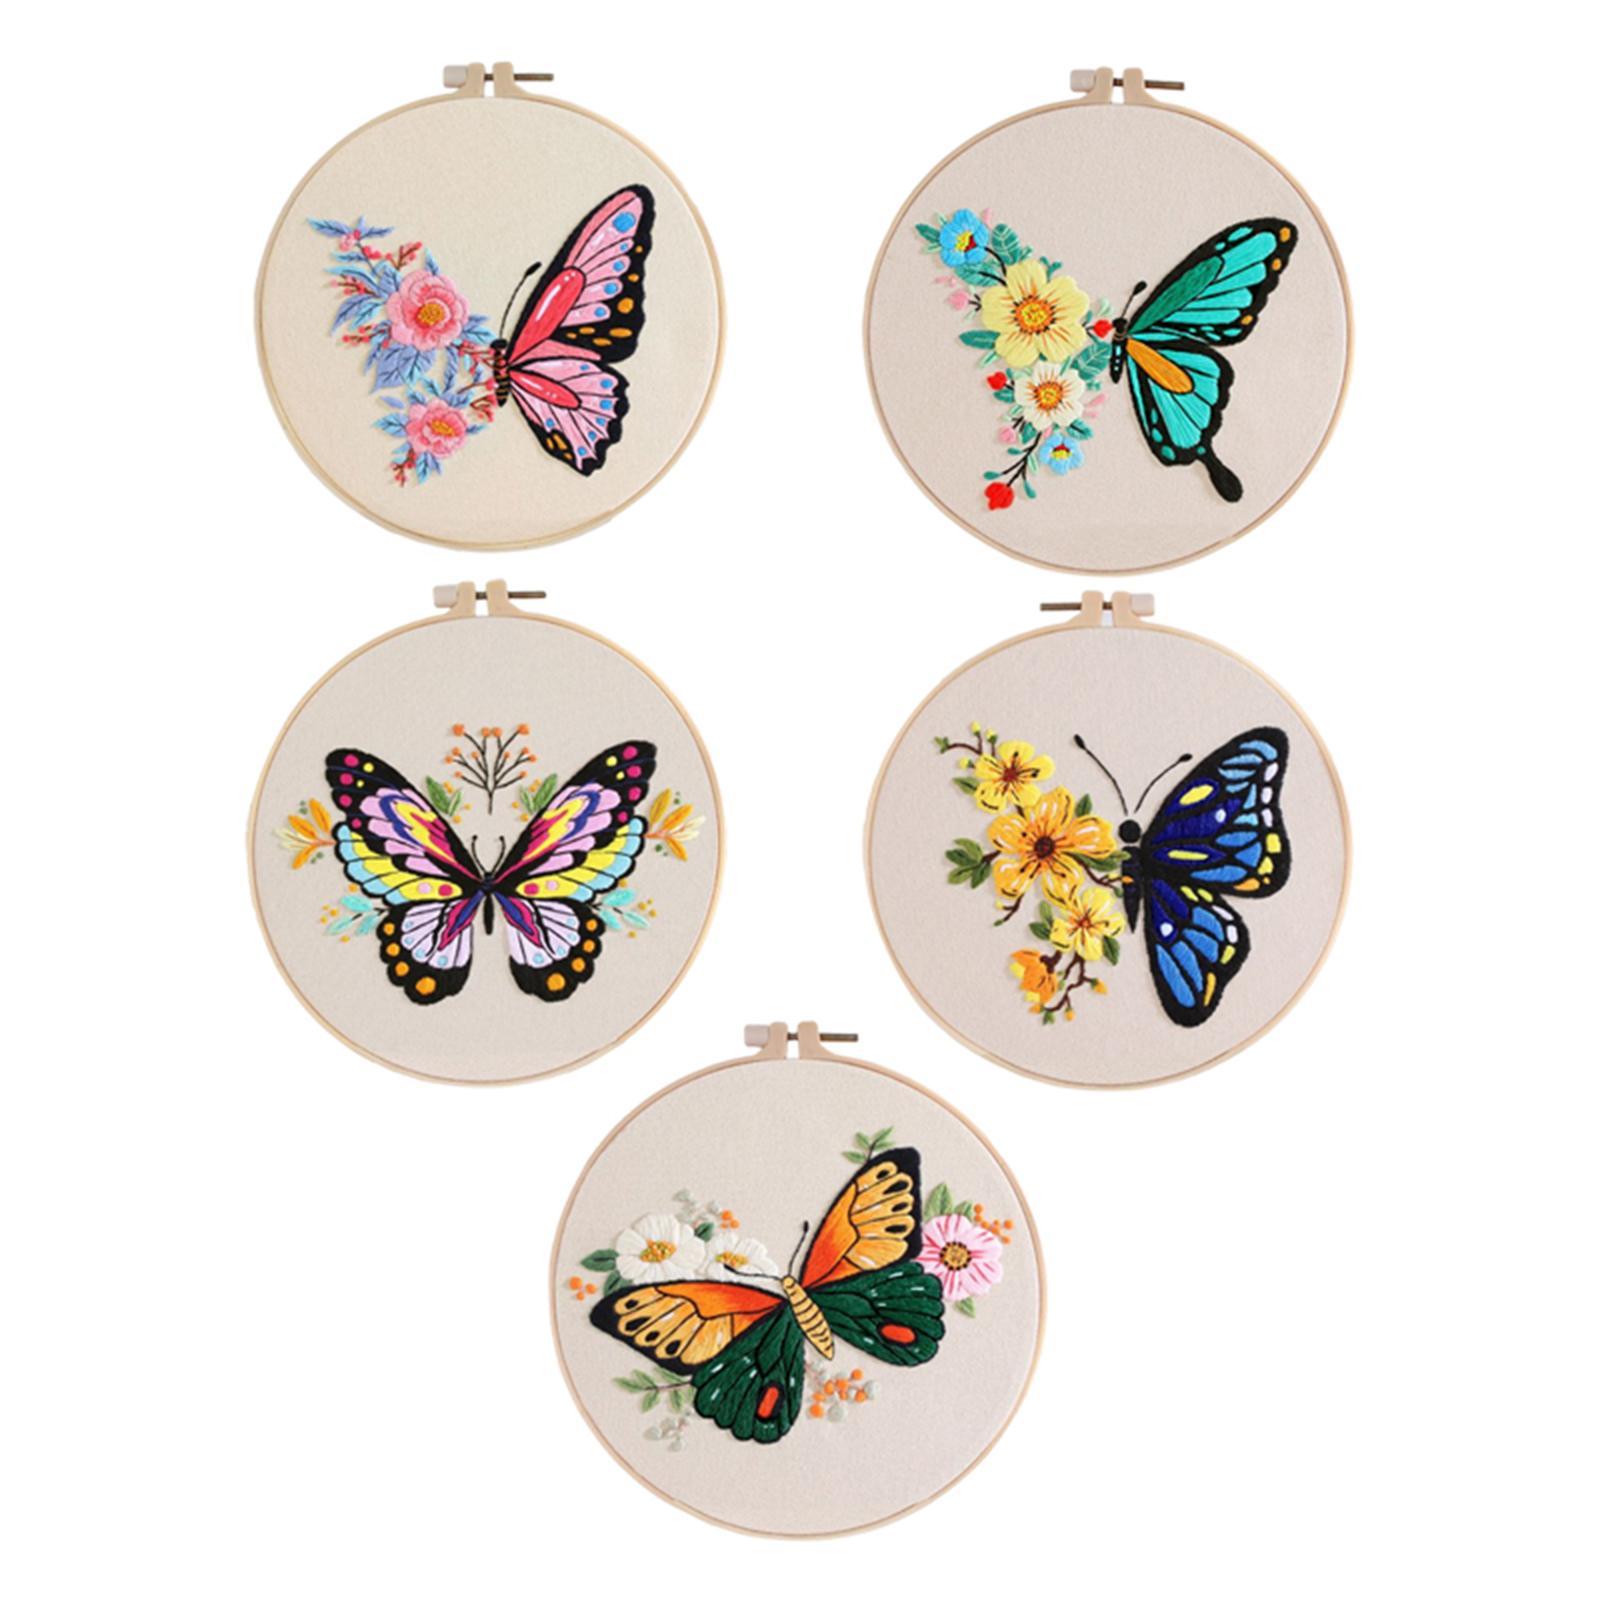 Embroidery Starter Kit Butterfly Flower Pattern with Embroidery ...